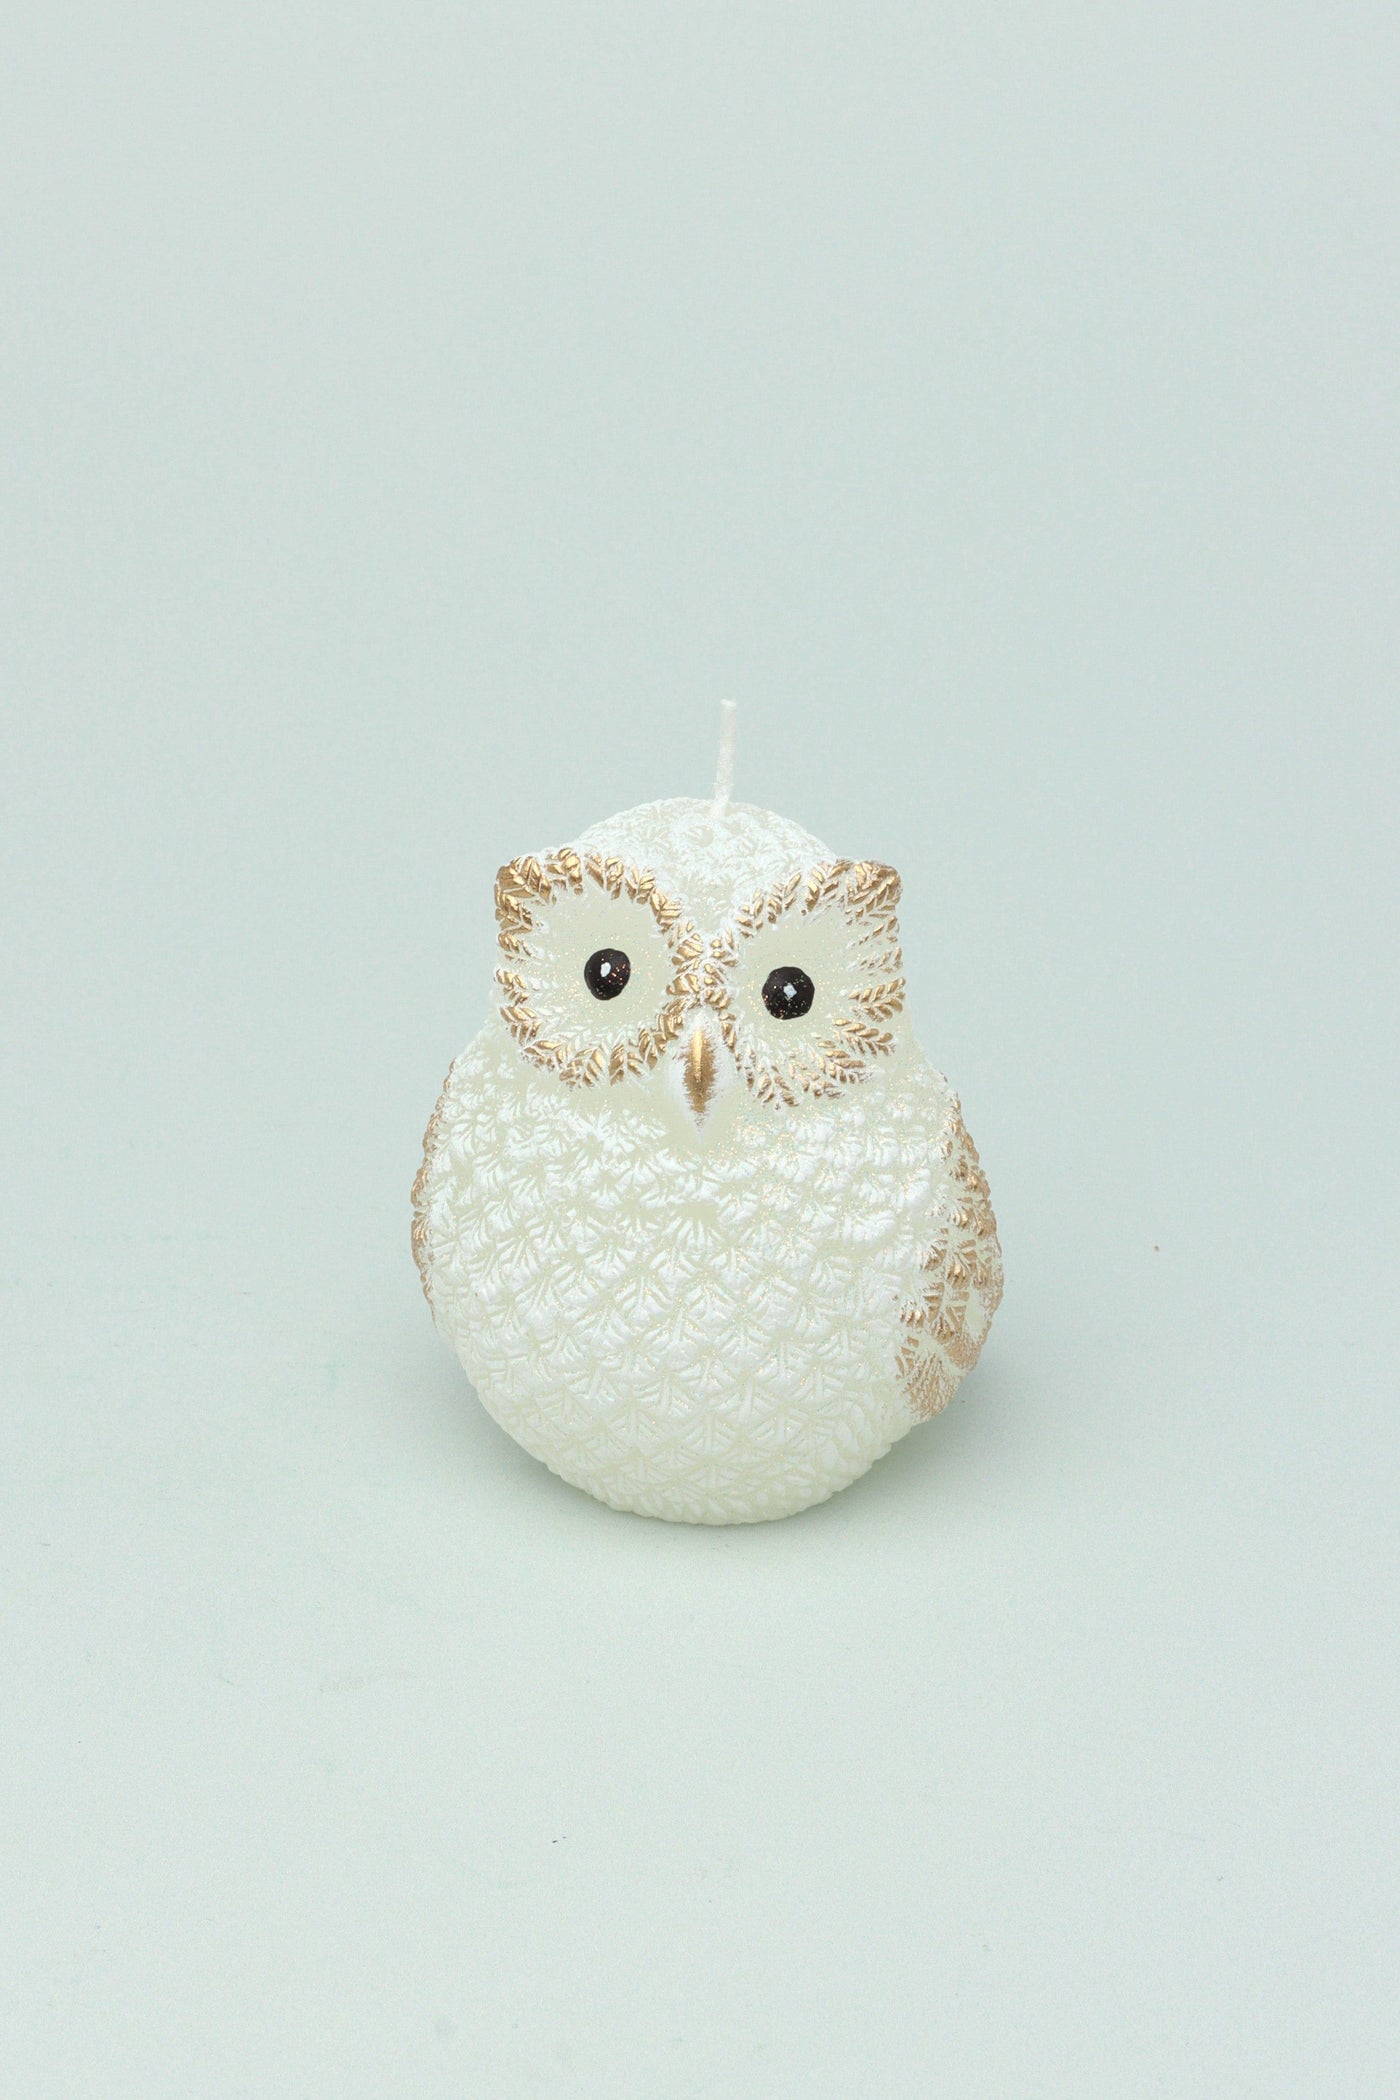 G Decor Candles White / Owl Forest Creatures White Glitter Realistic Animals Birds Cute Festive 3D Candle